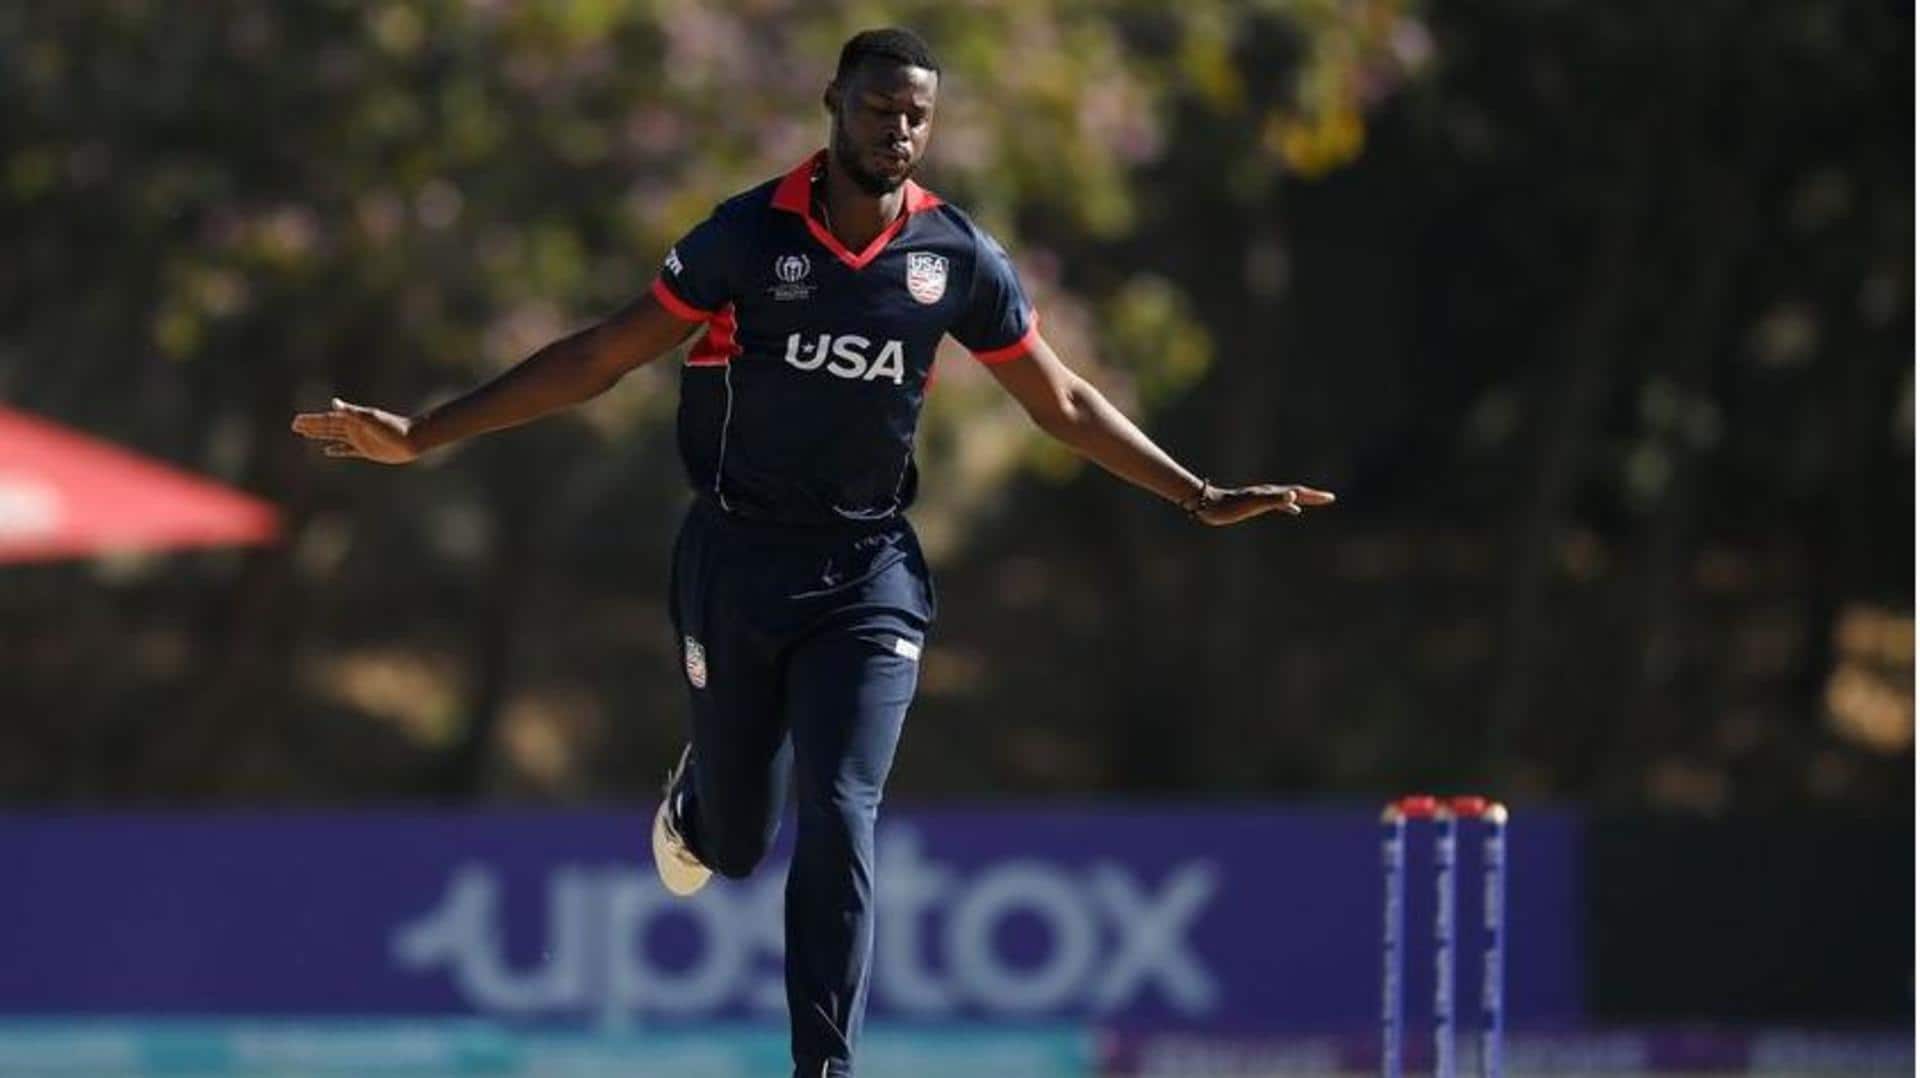 CWC Qualifiers: USA's Kyle Phillip suspended from bowling 